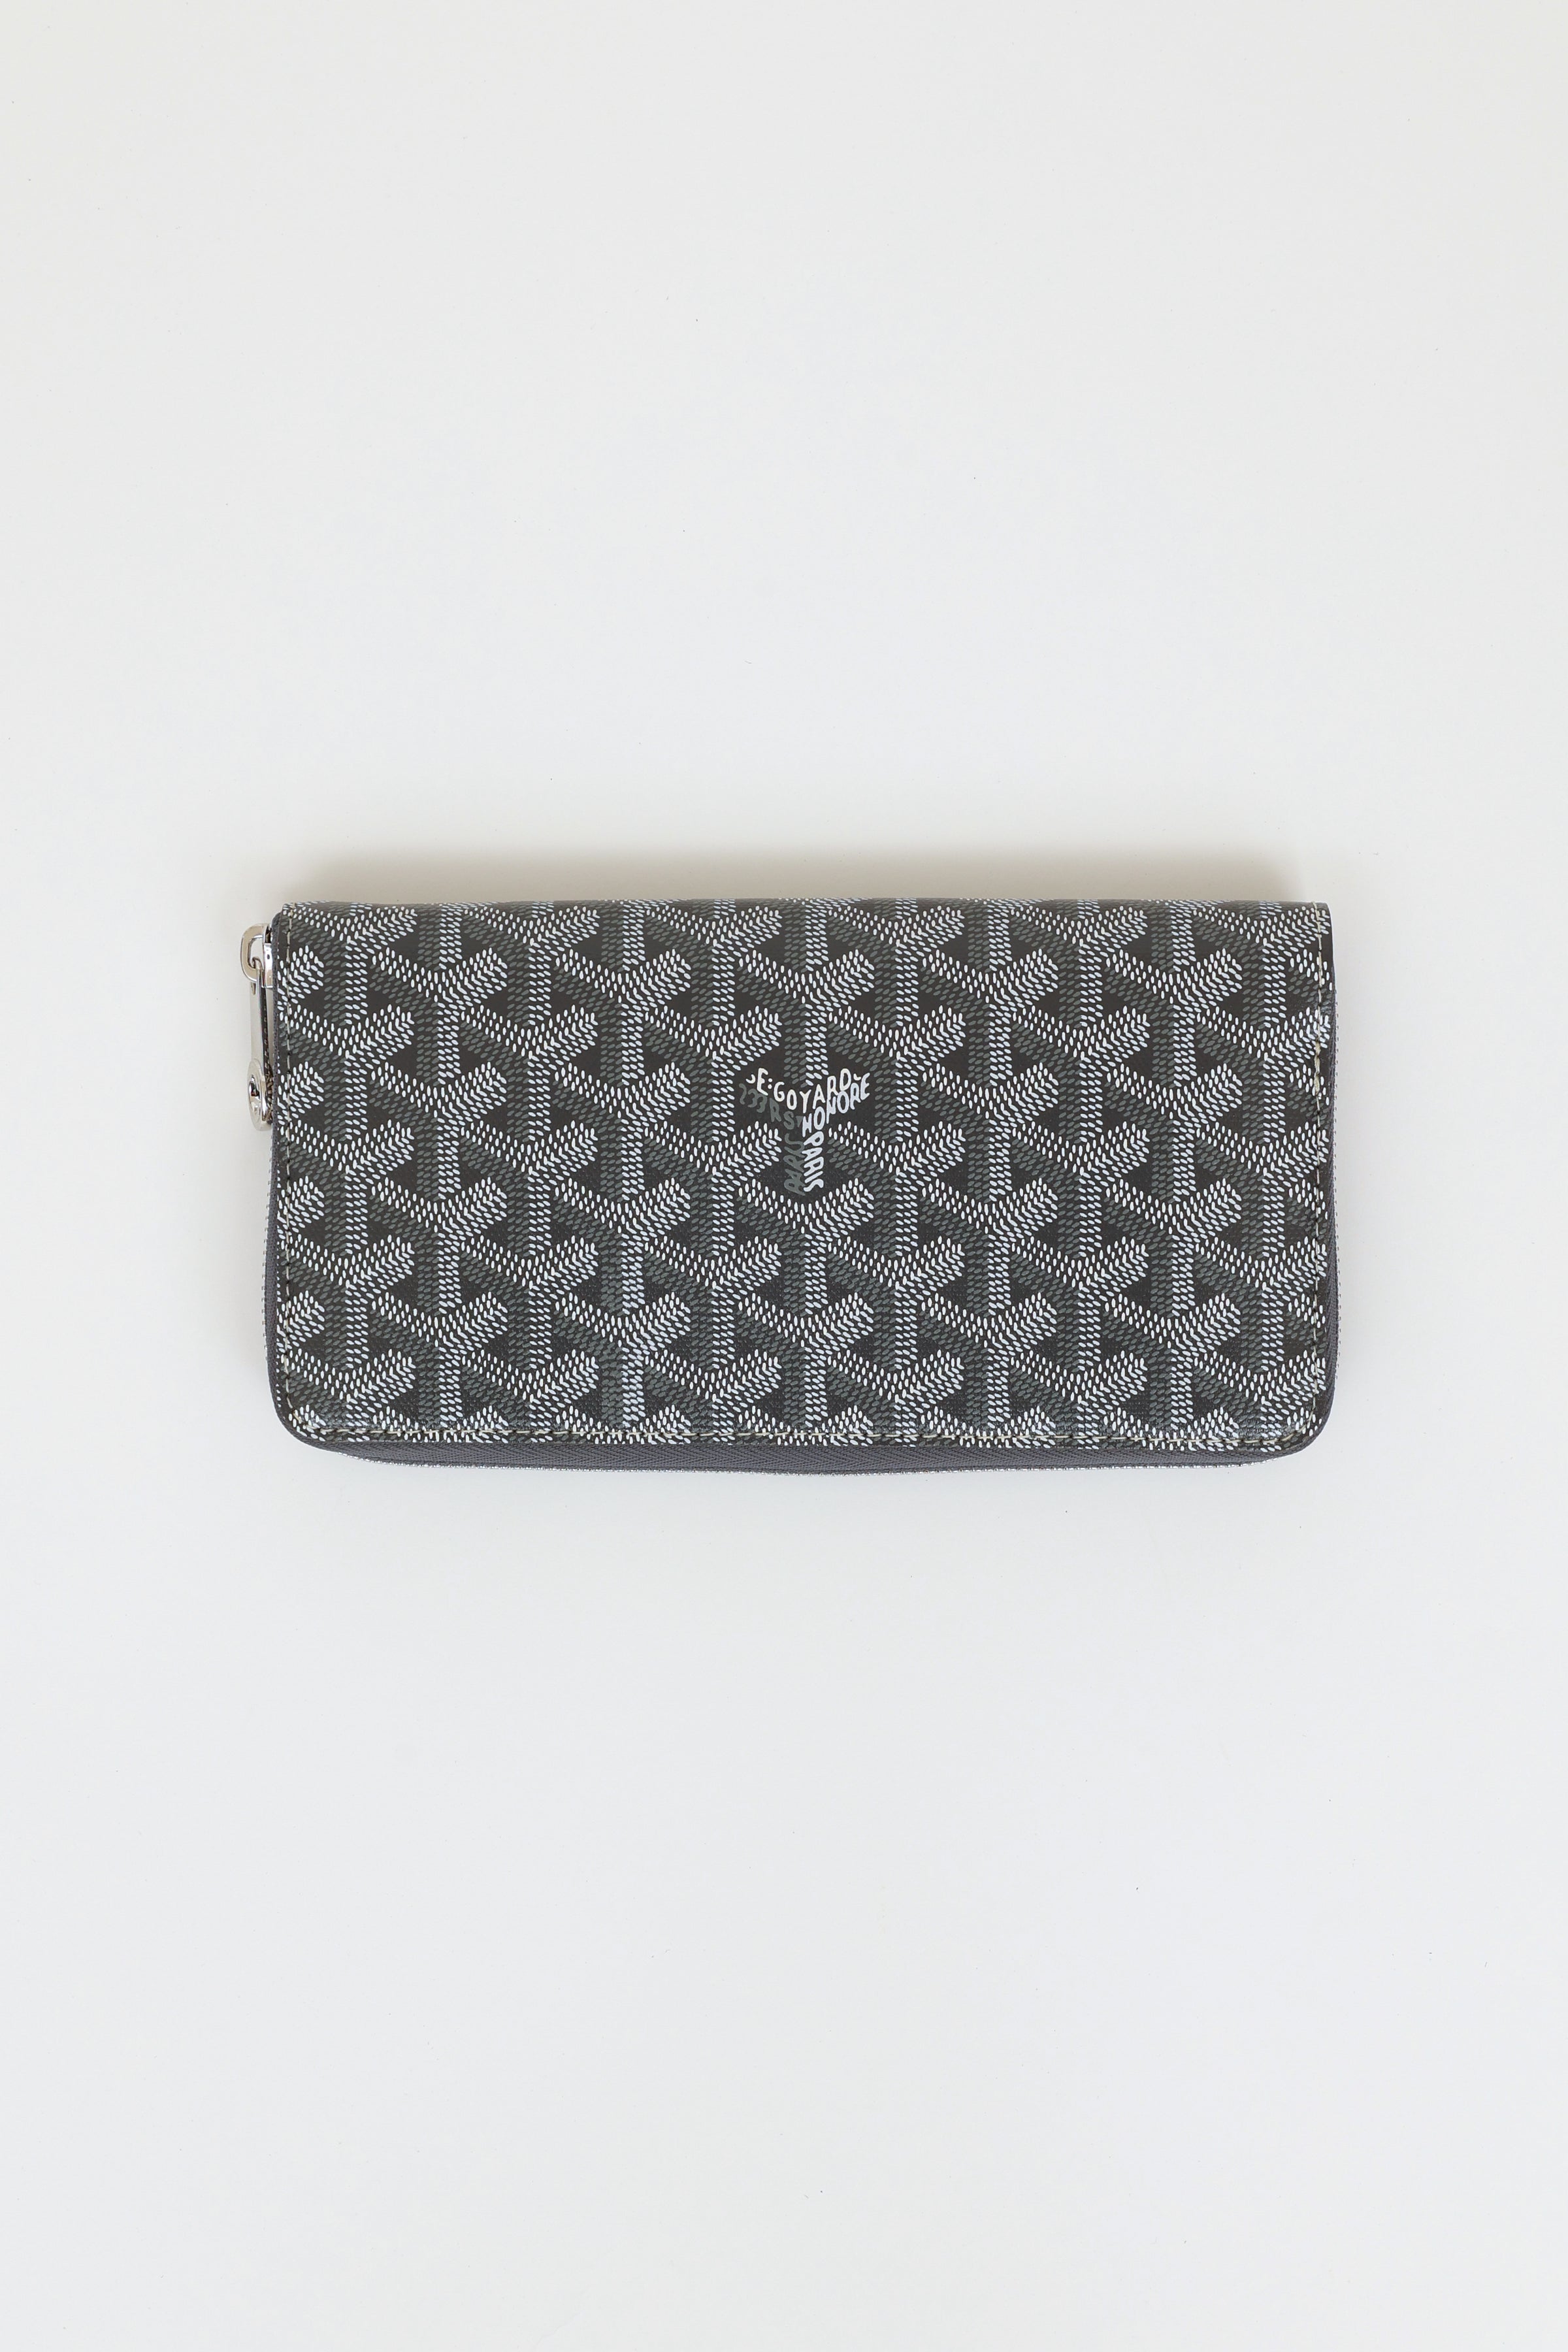 Goyard Matignon Zip Wallet Coated Canvas with Leather PM Gray 2269964